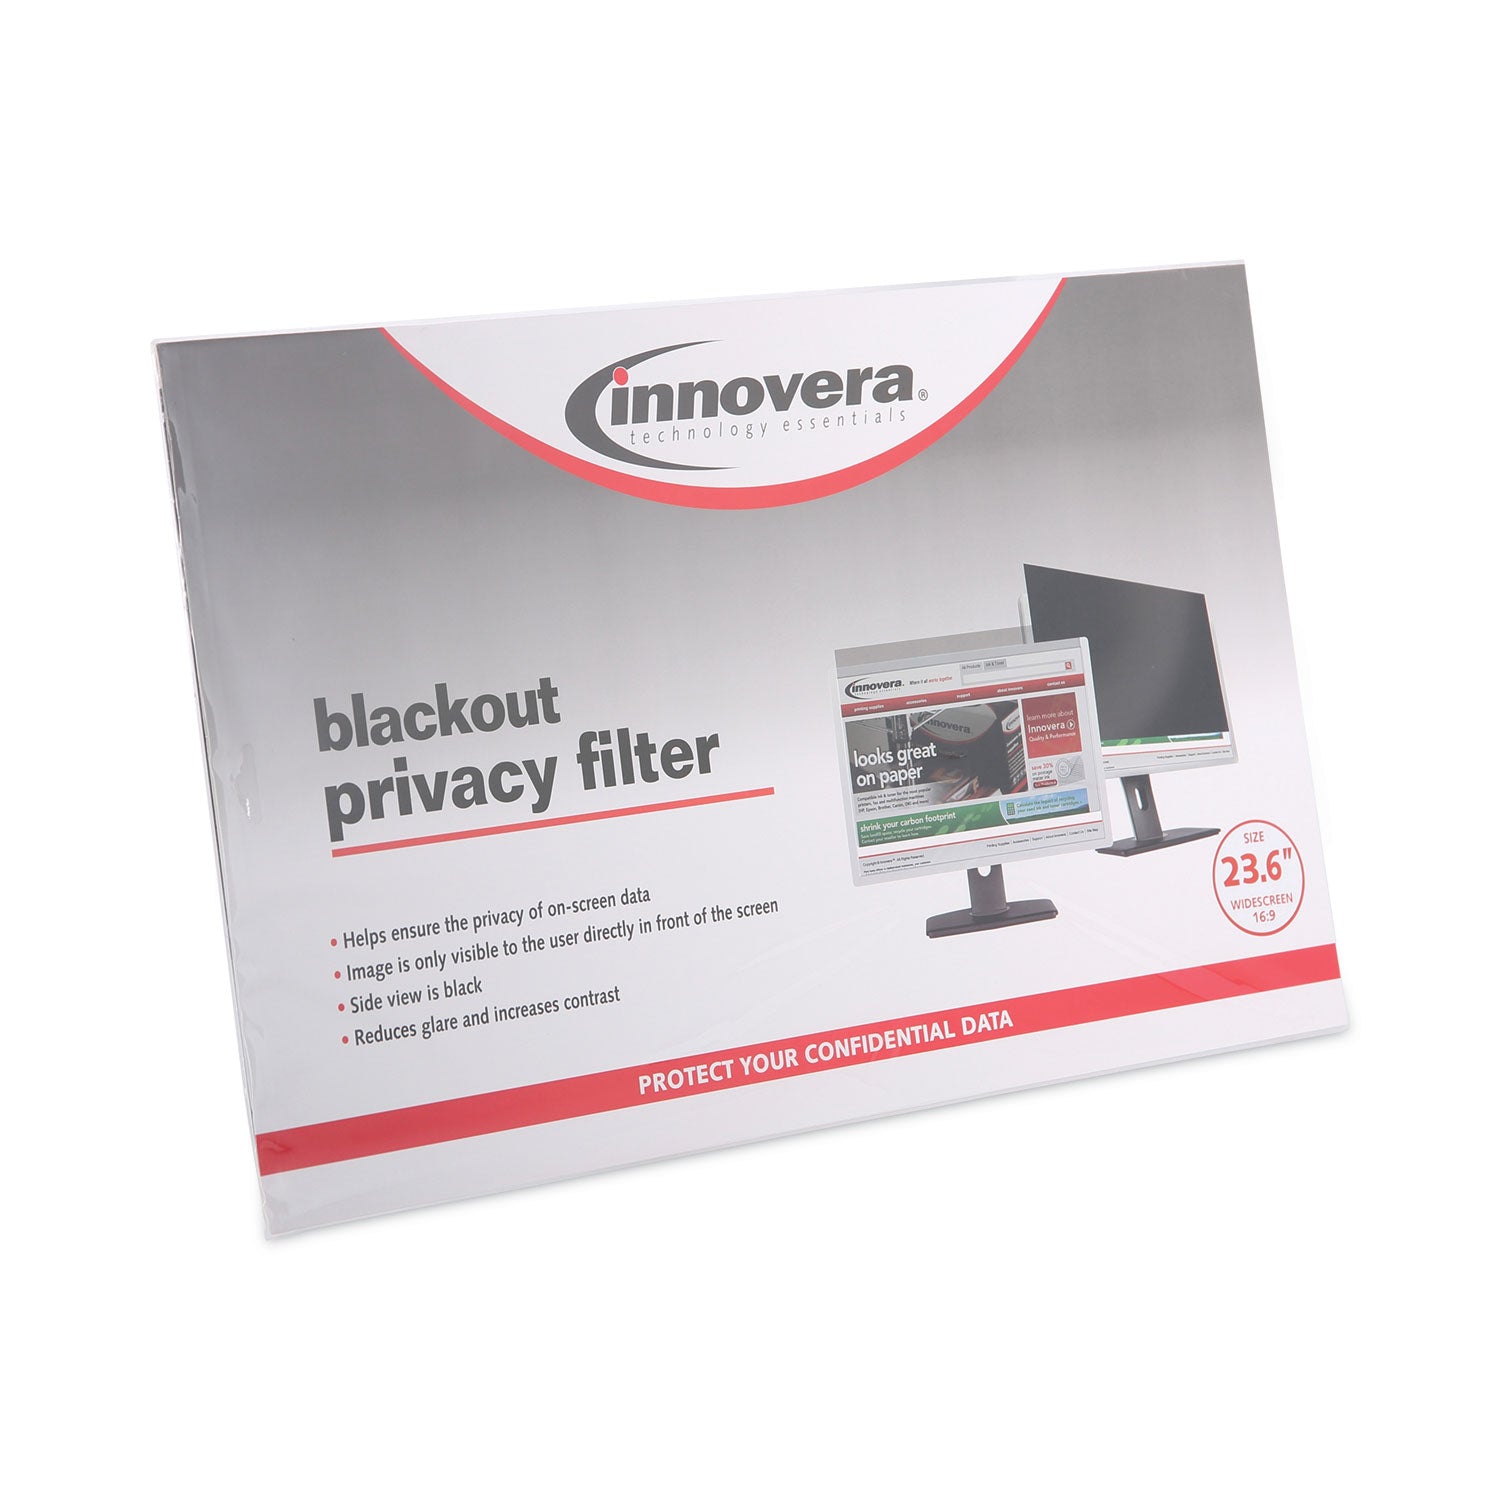 blackout-privacy-monitor-filter-for-236-widescreen-flat-panel-monitor-169-aspect-ratio_ivrblf236w - 2